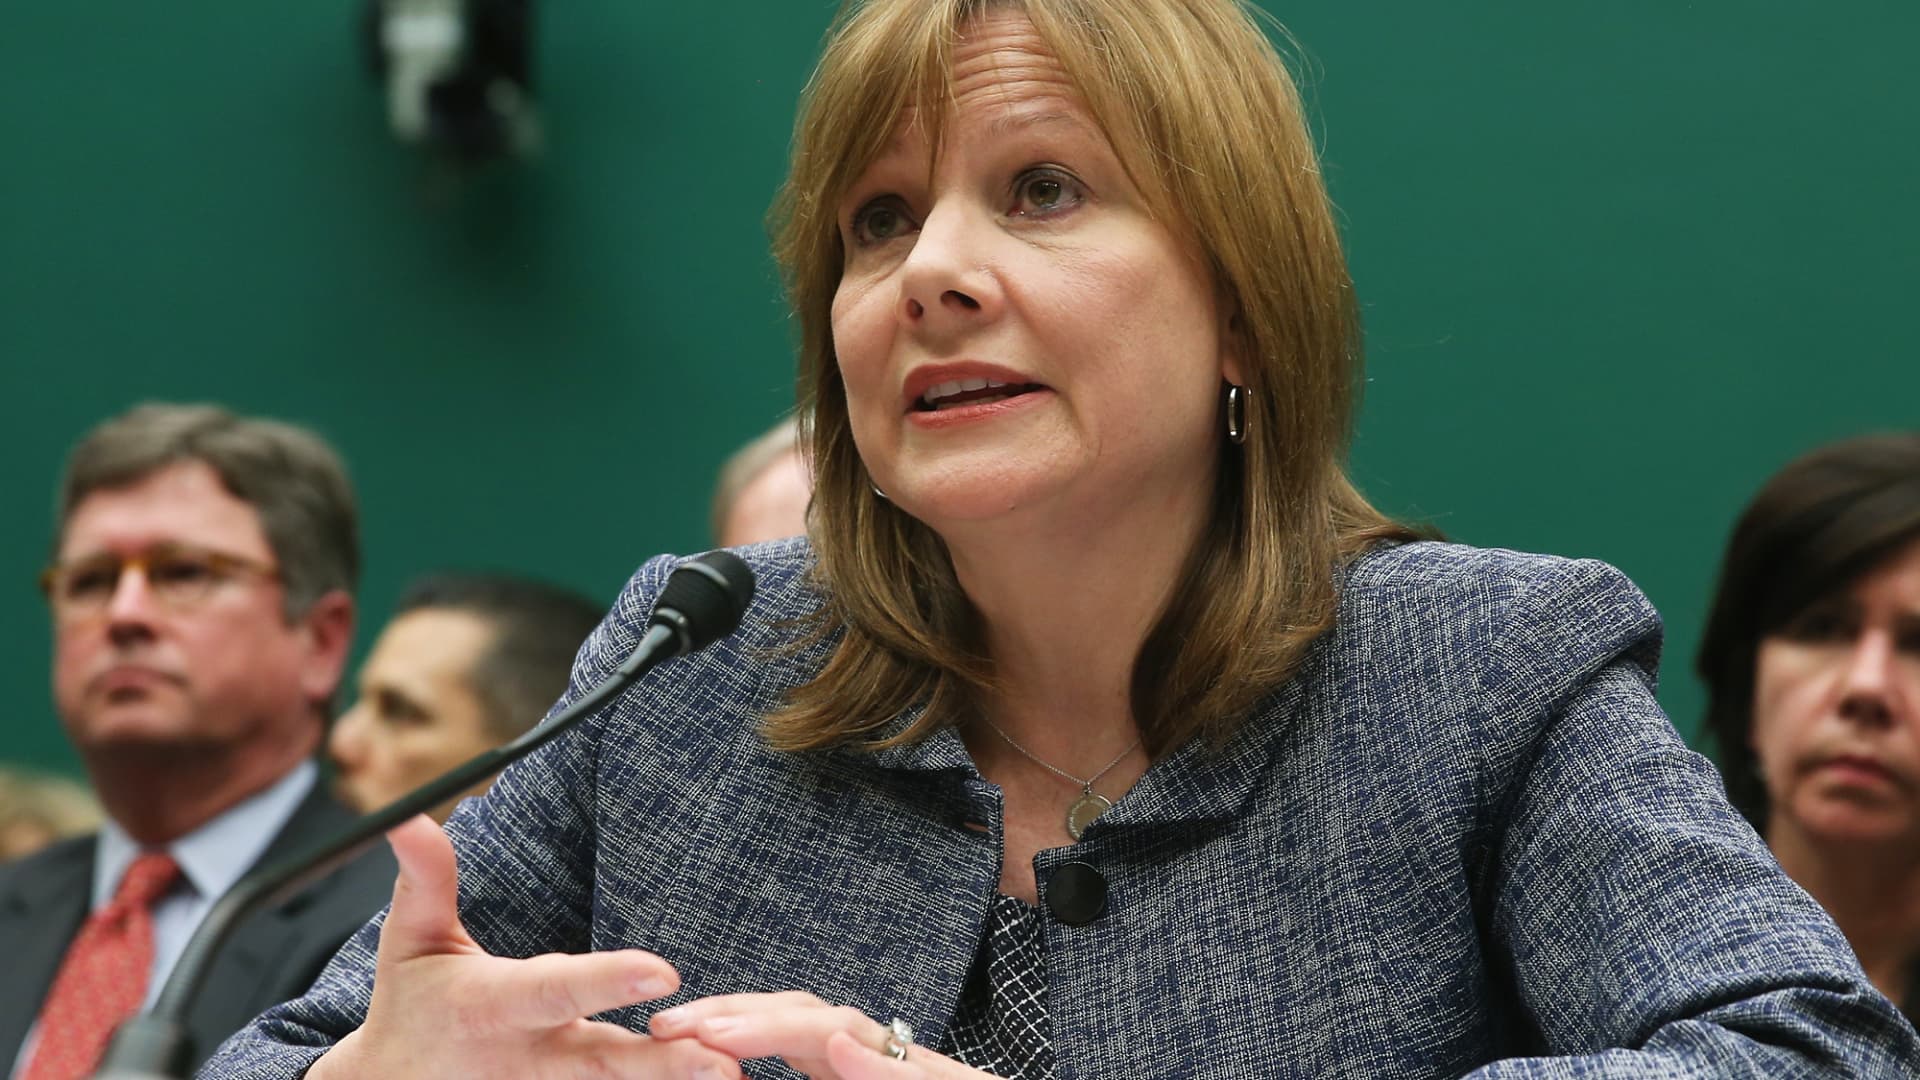 General Motors CEO Mary Barra testifies during a House Energy and Commerce Committee hearing on Capitol Hill in Washington, April 1, 2014.